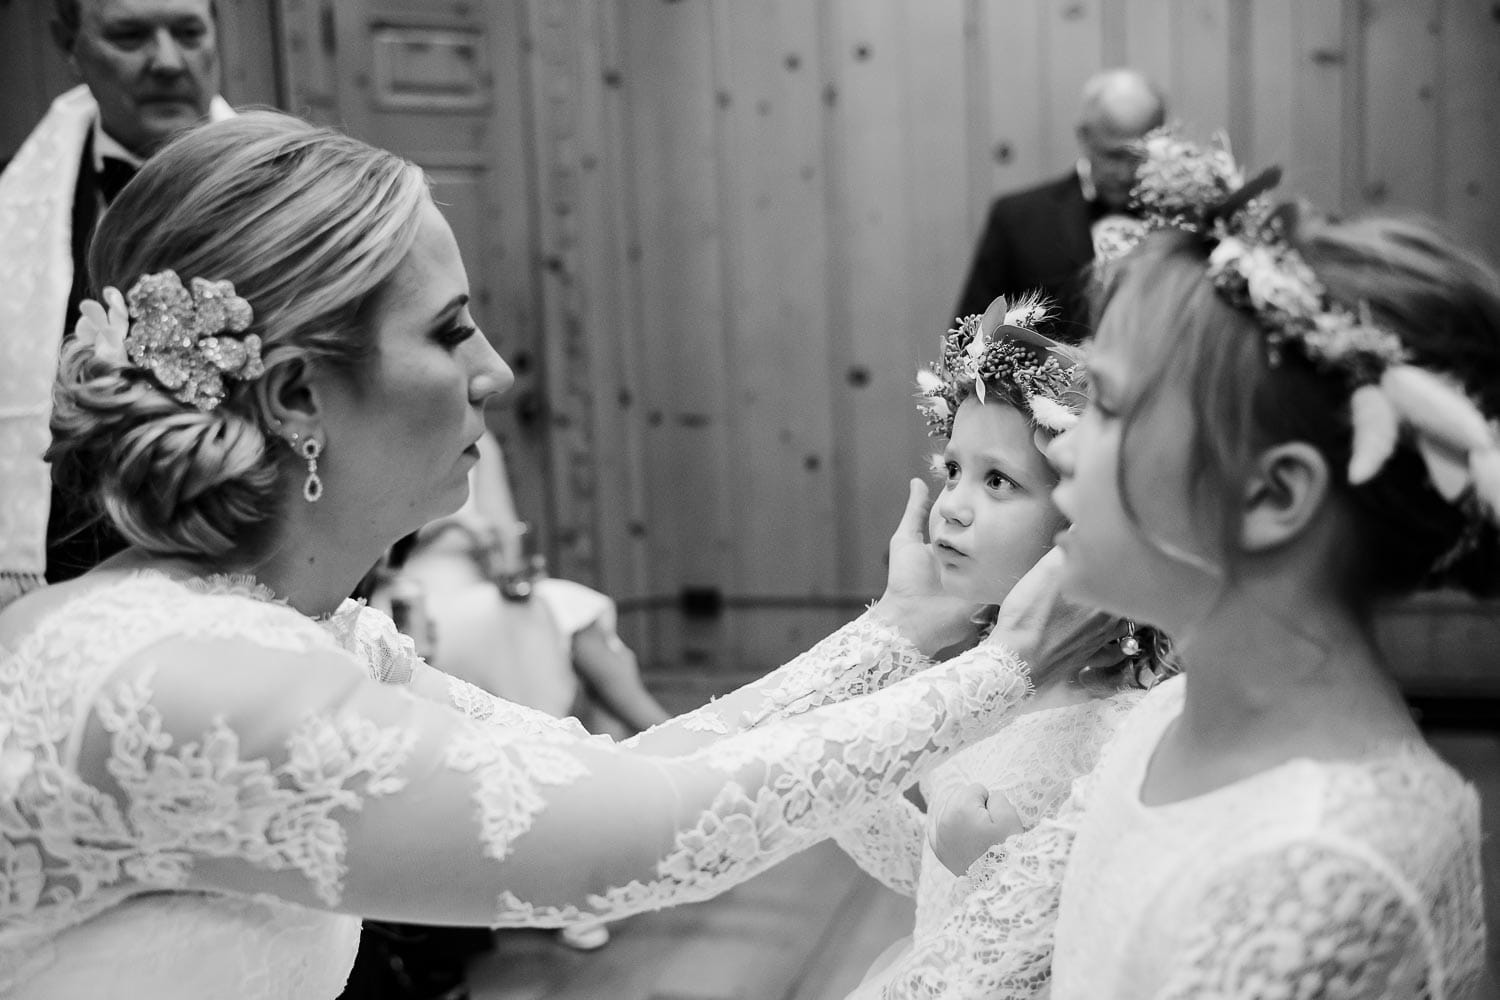 The bride fixes flowers on one of two flowergirls